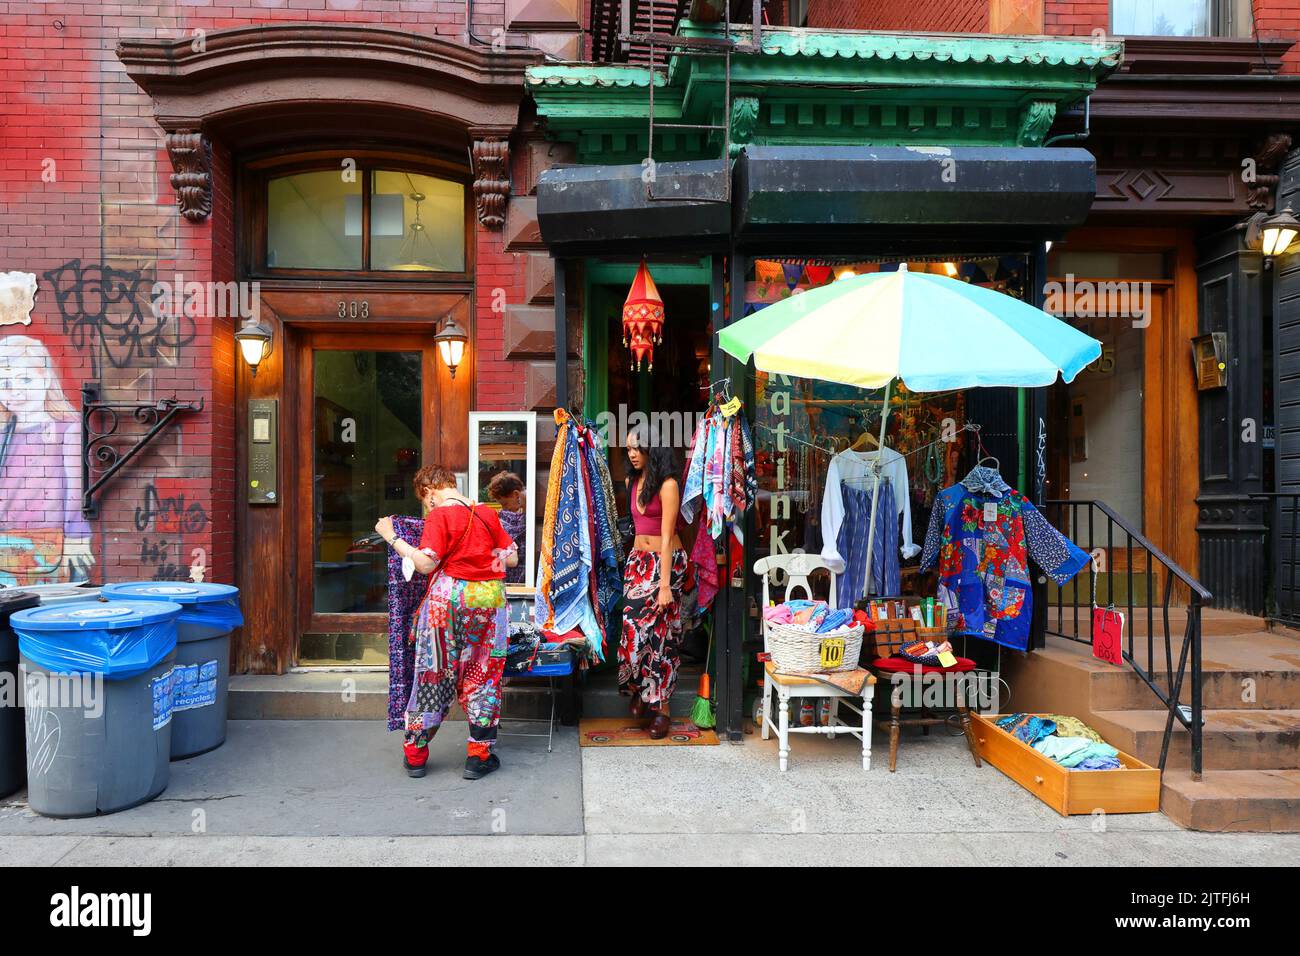 Katinka, 303 E 9th St, New York, NYC storefront photo of an colorful Indian clothing store and accessories in Manhattan's East Village neighborhood Stock Photo